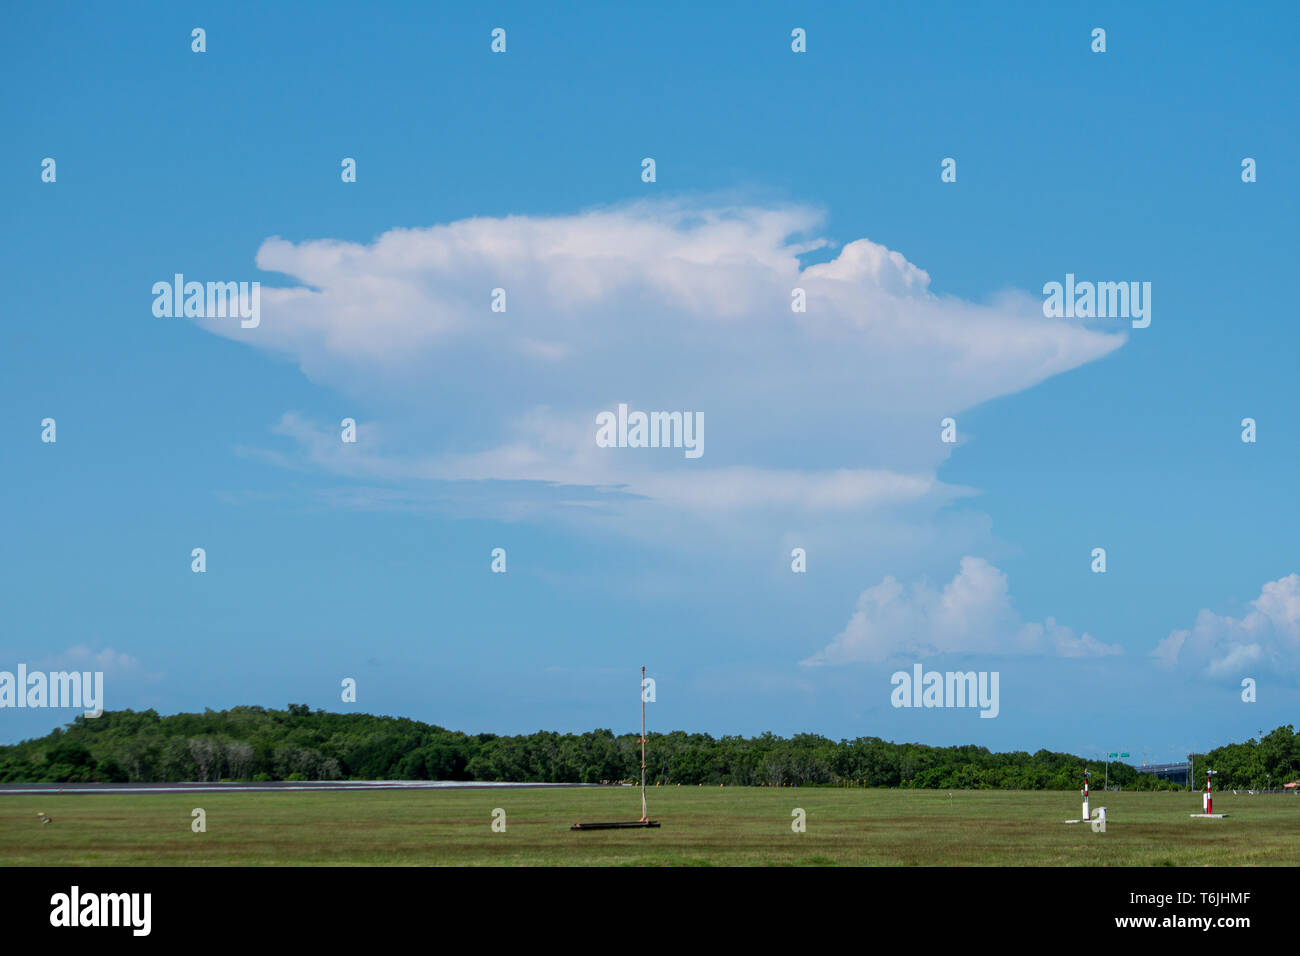 A process of convective cloud from cumulus to towering cumulus and cumulonimbus cloud at the green grass and tree surface Stock Photo